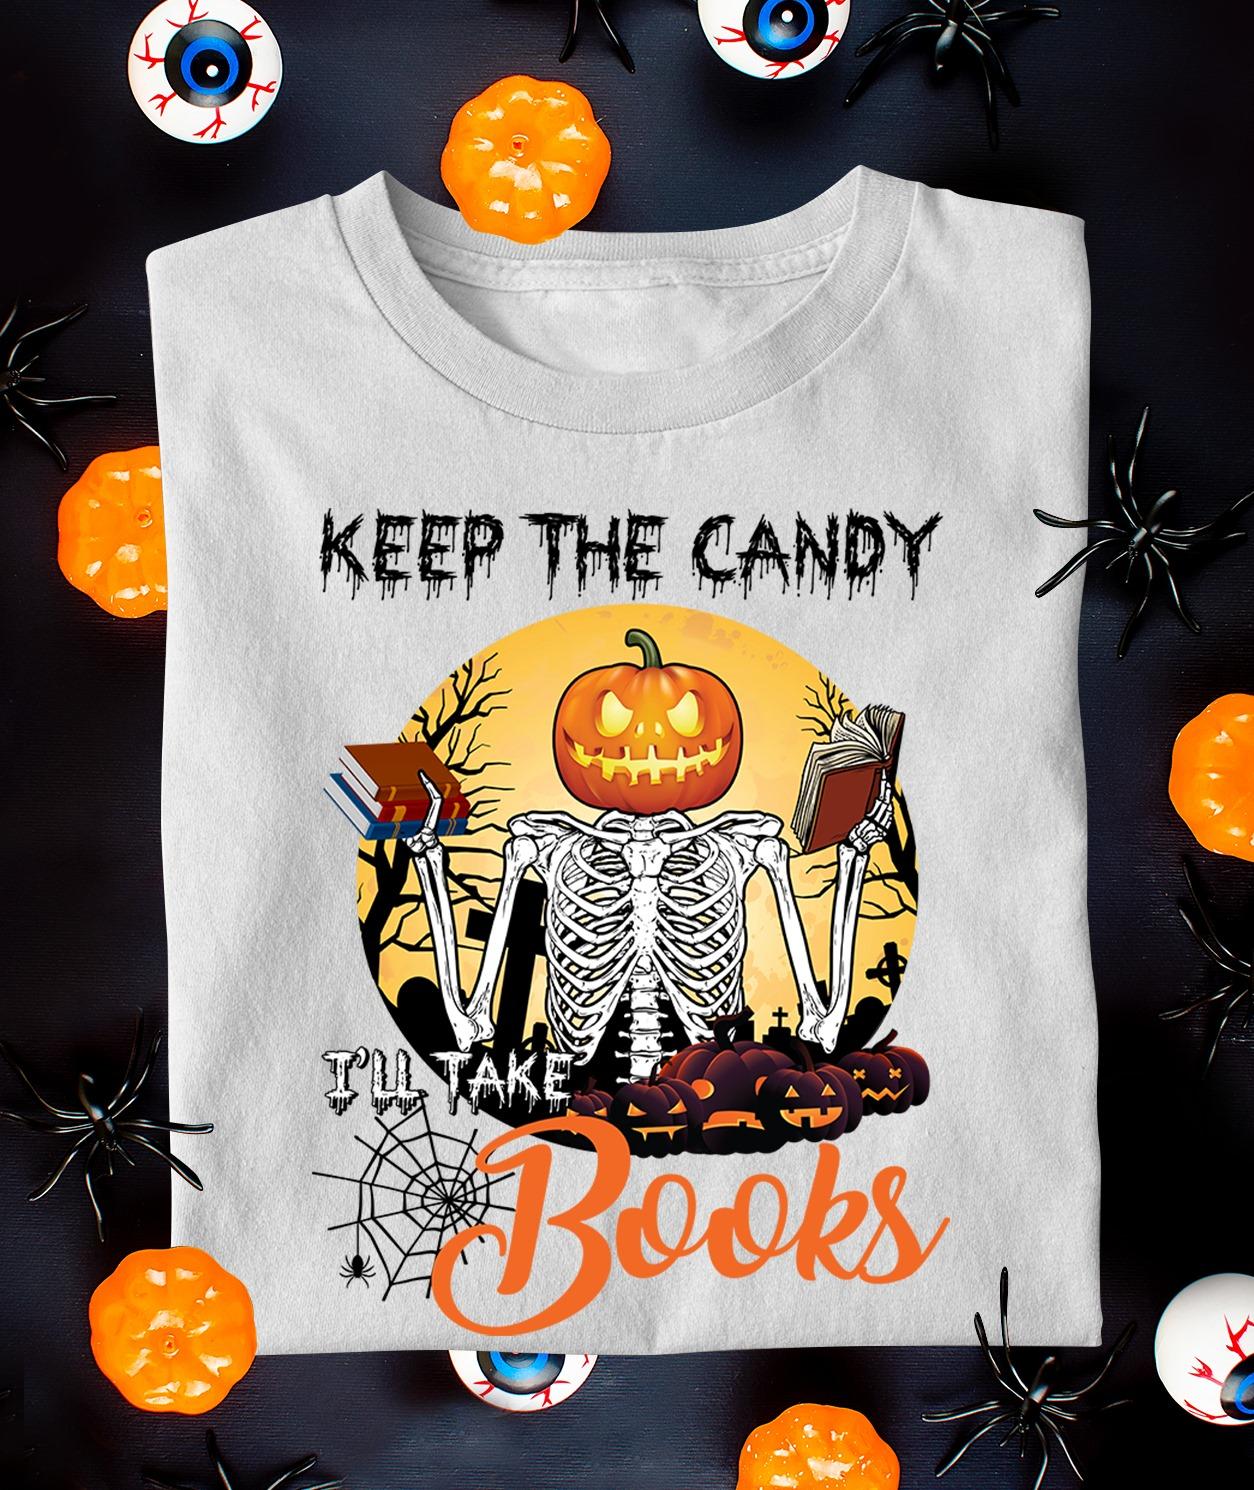 Keep the candy I'tall books - Skull devil pumpkin, Halloween gift for bookaholic